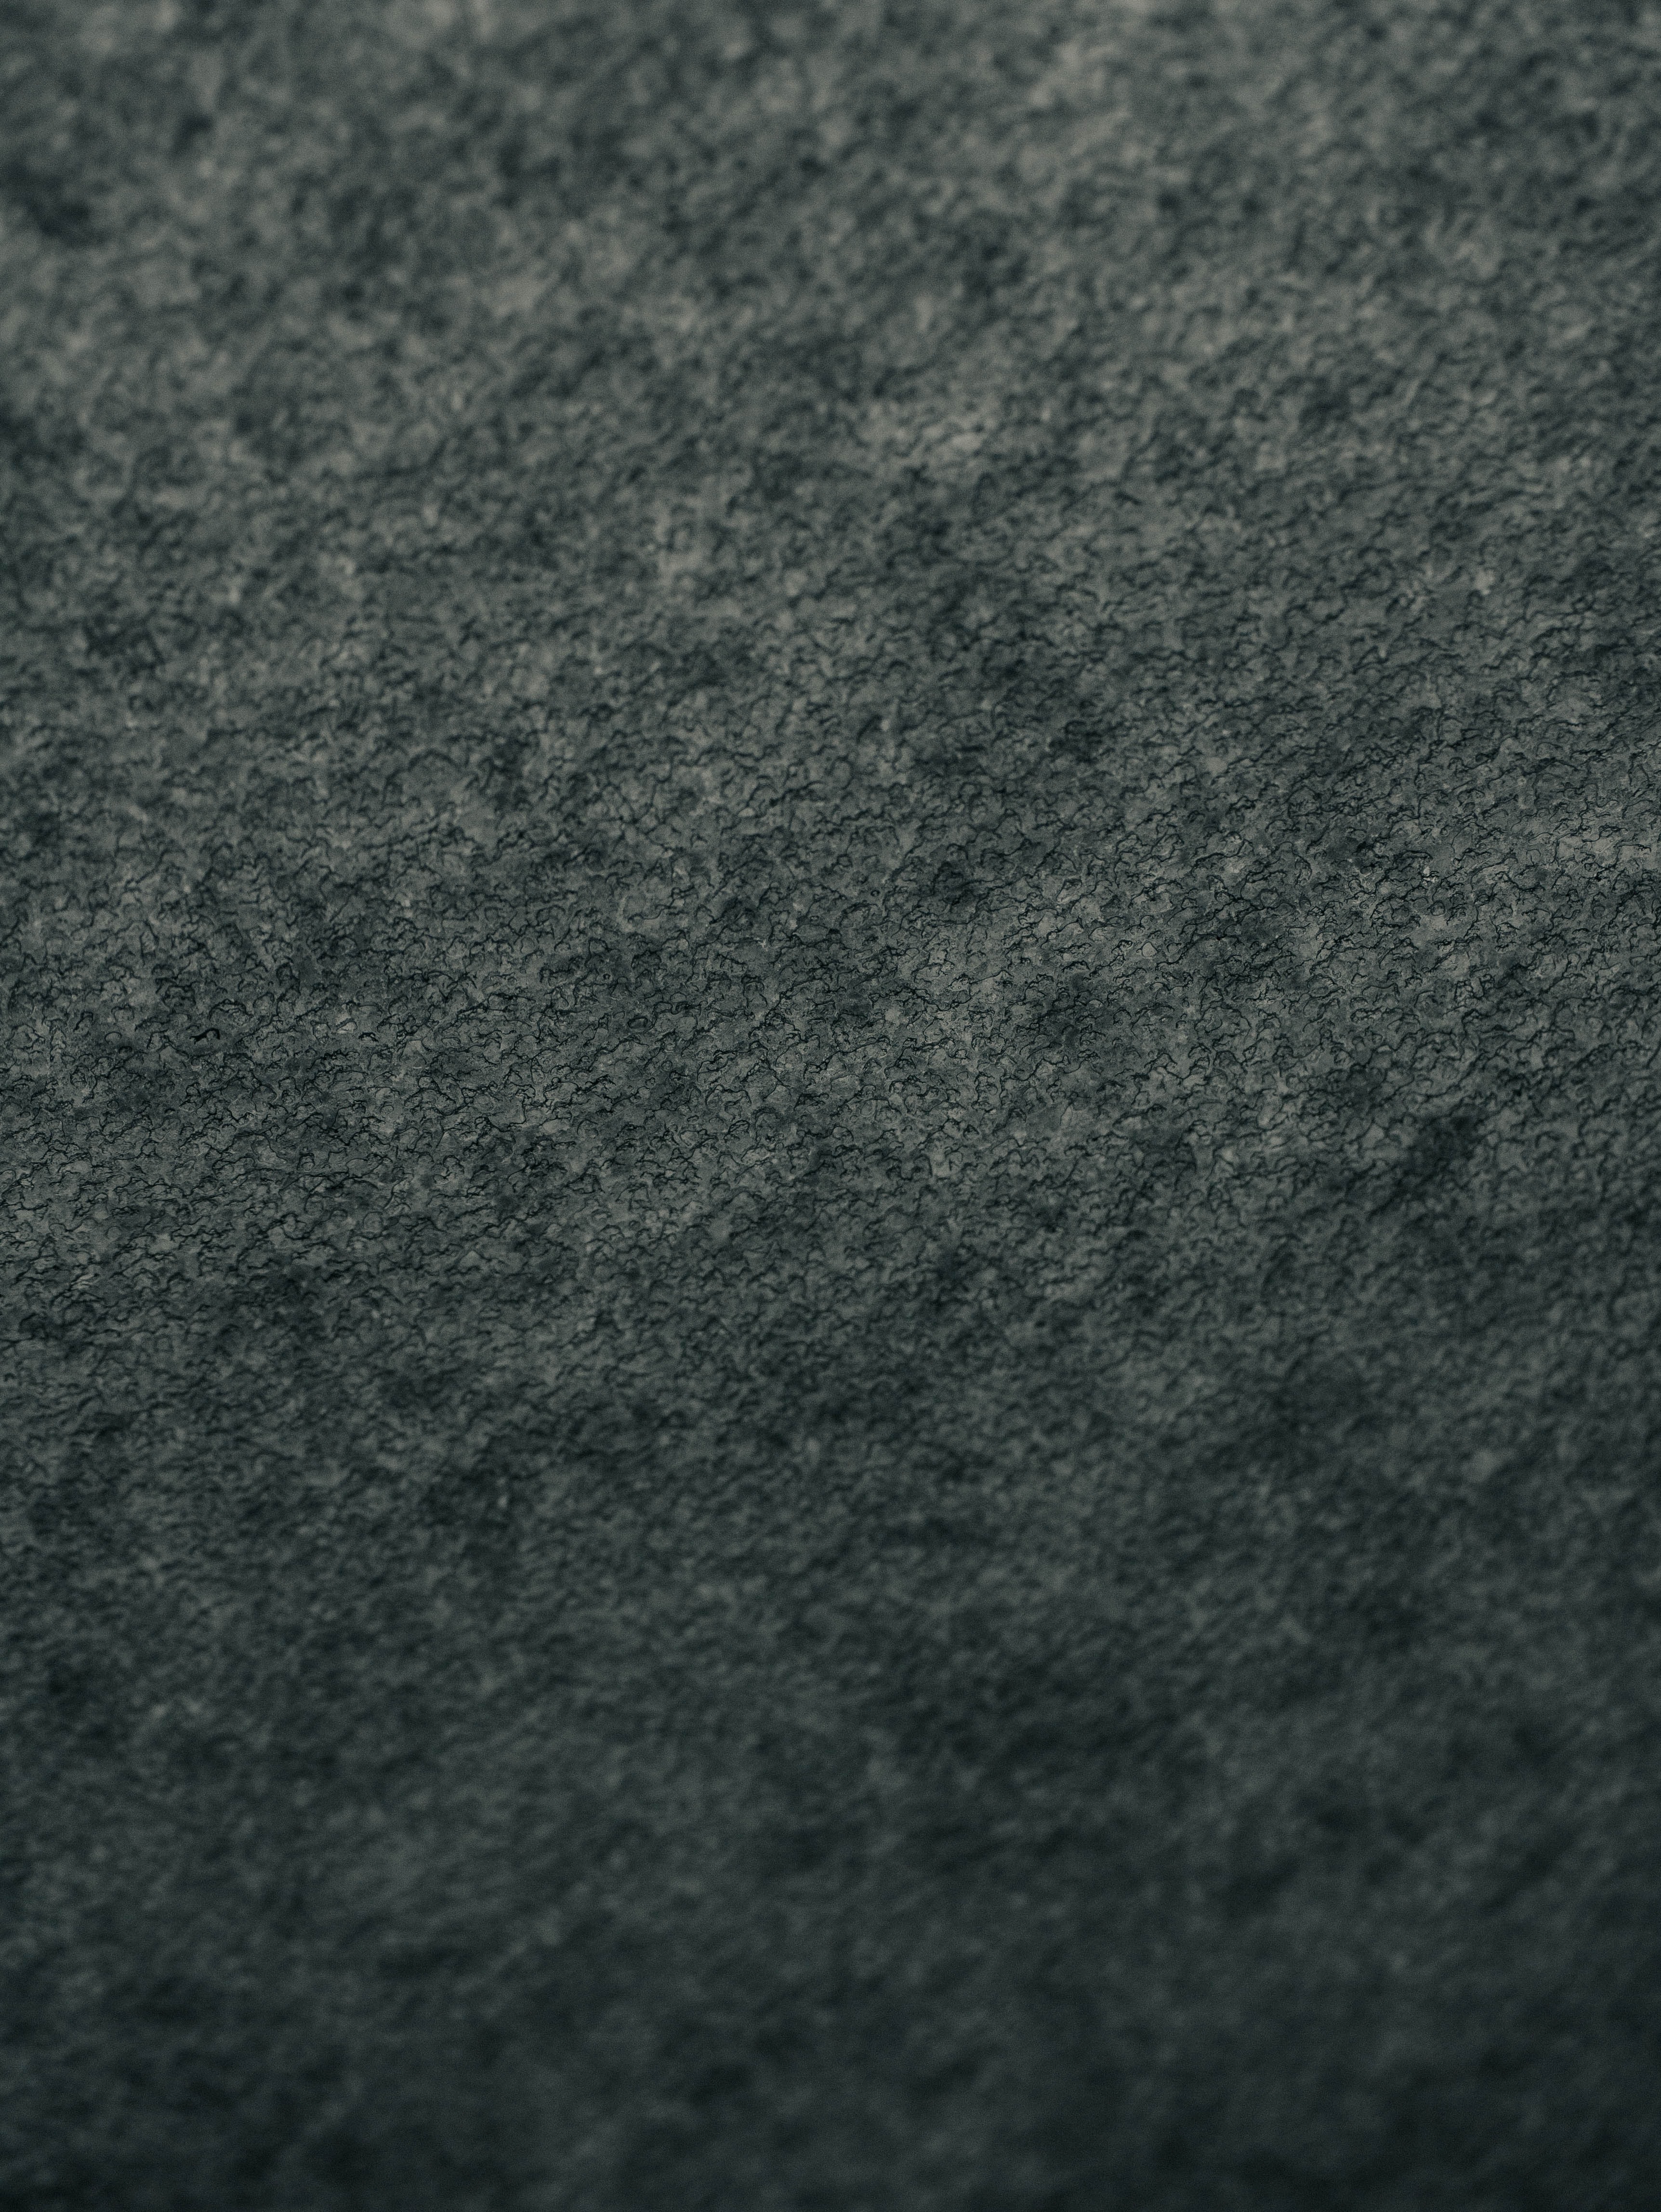 surface, texture, textures, relief, grey, rough, rugged 5K